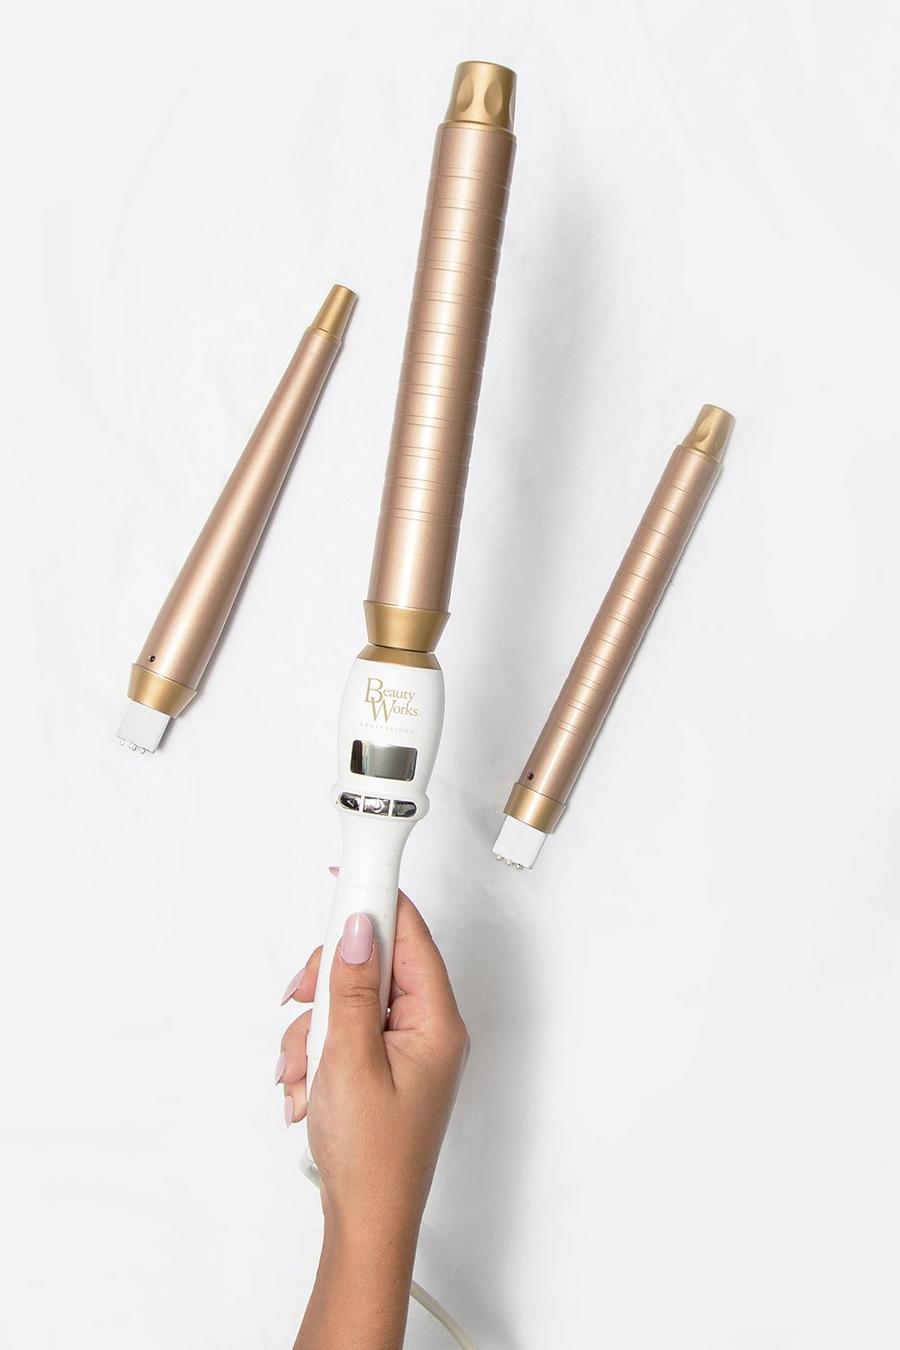 Beauty Works Pro Styler Trio Edition, Oro rosa metálicos